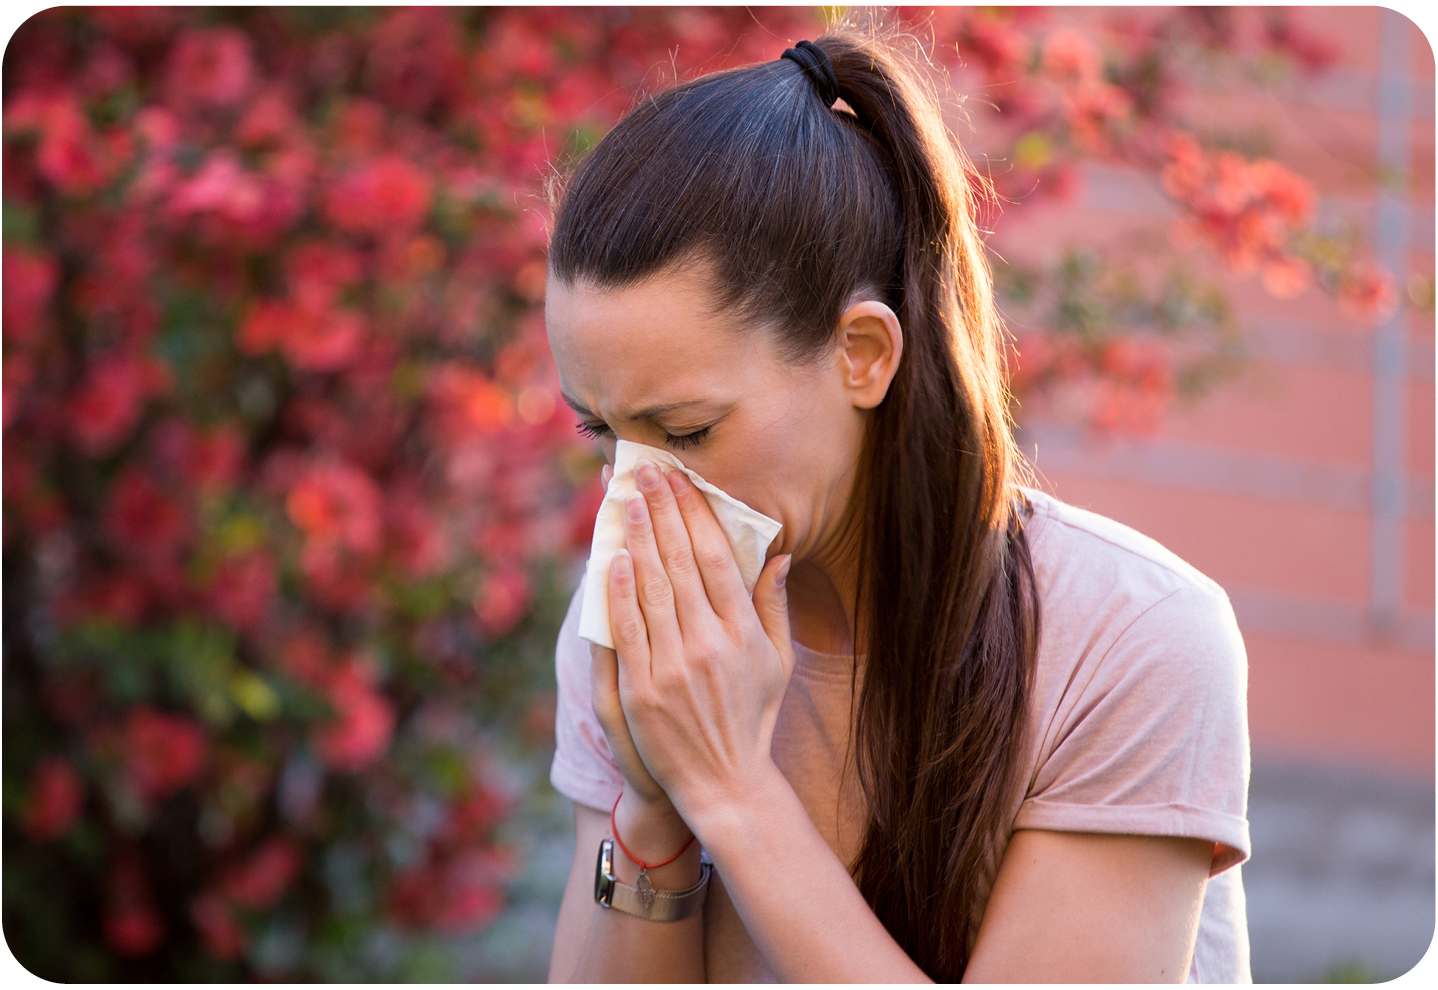 Woman blowing her nose into tissues during peak allergy season